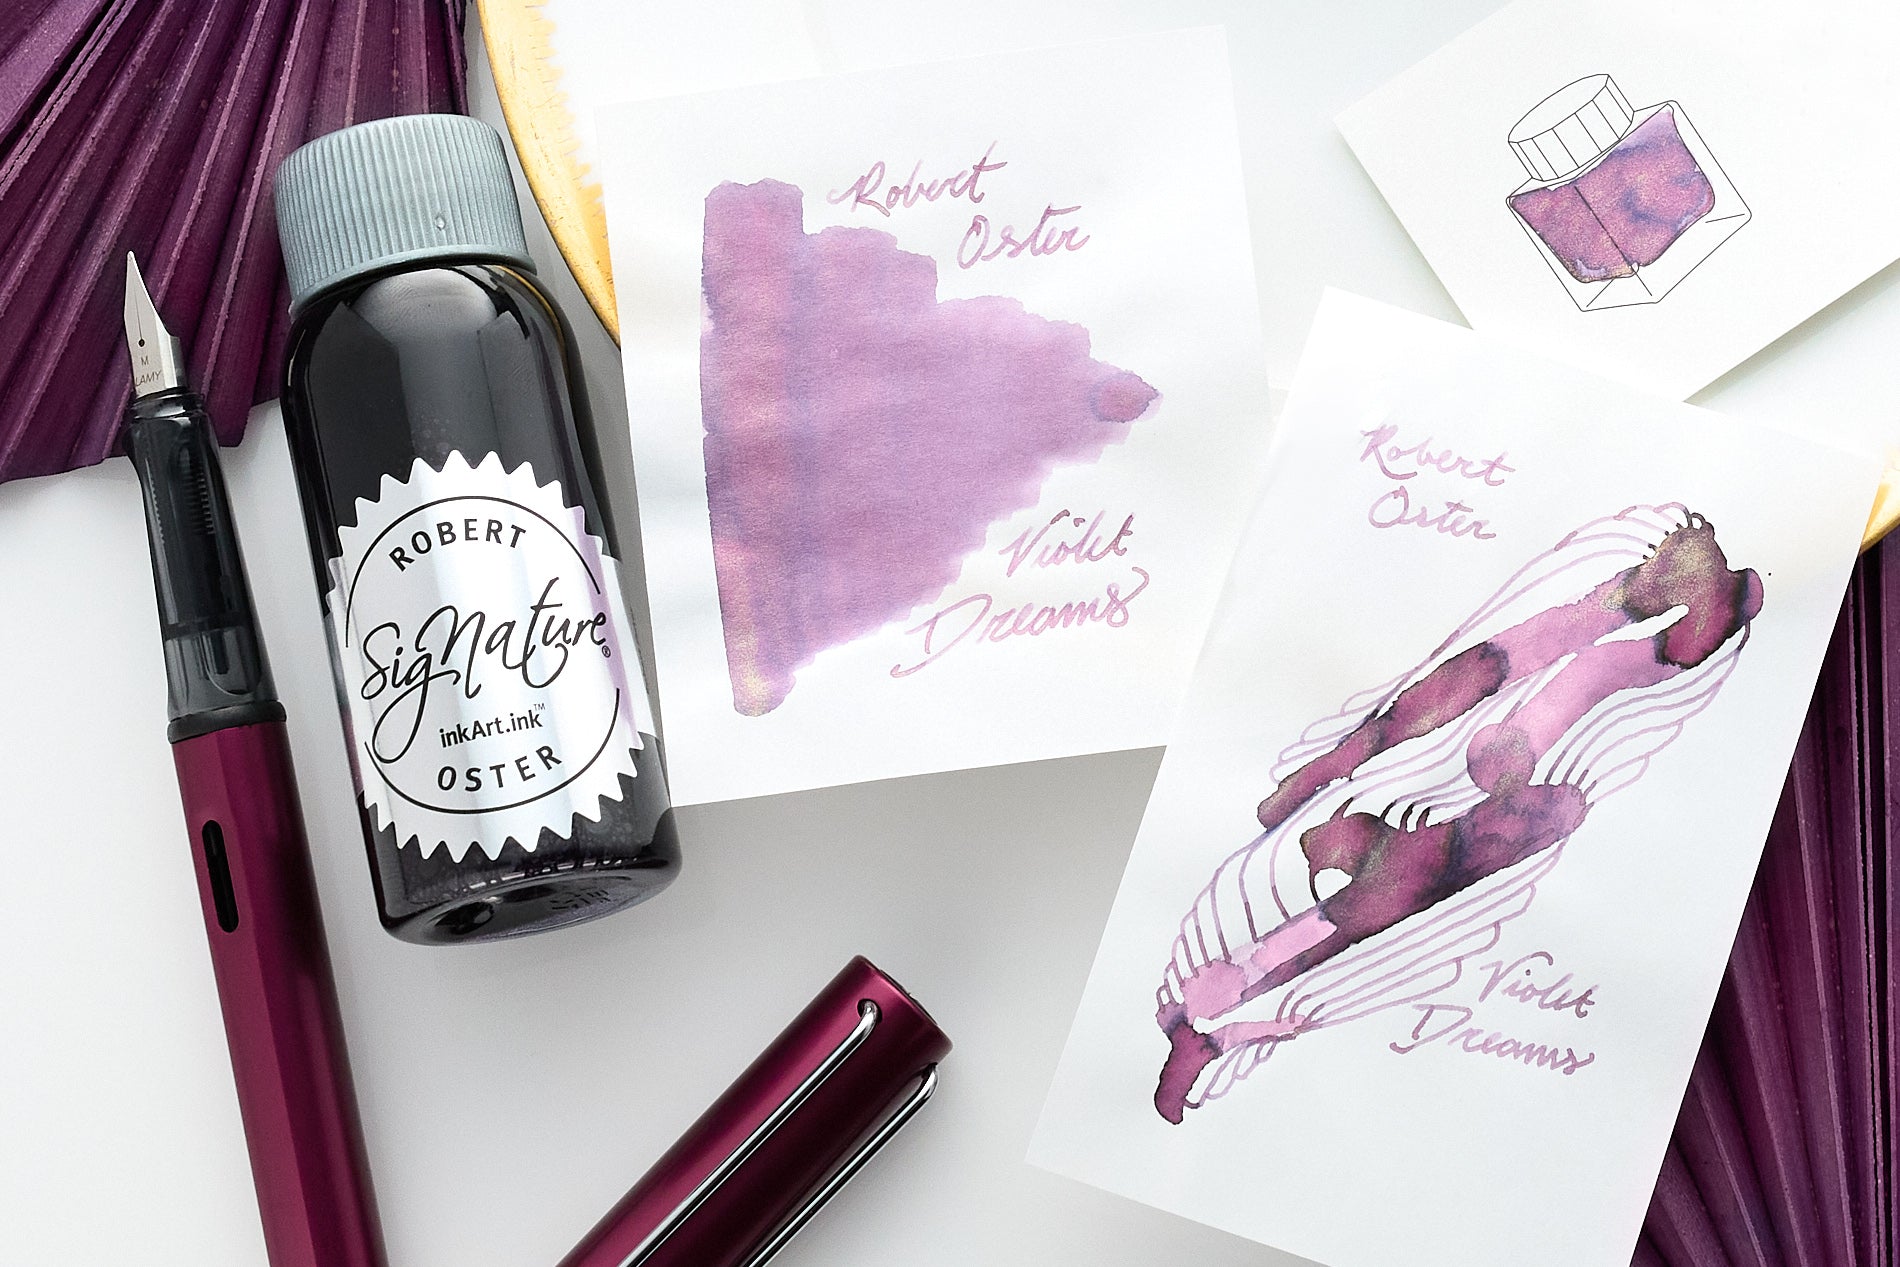 Robert Oster violet Dreams With examples and bottles on paper